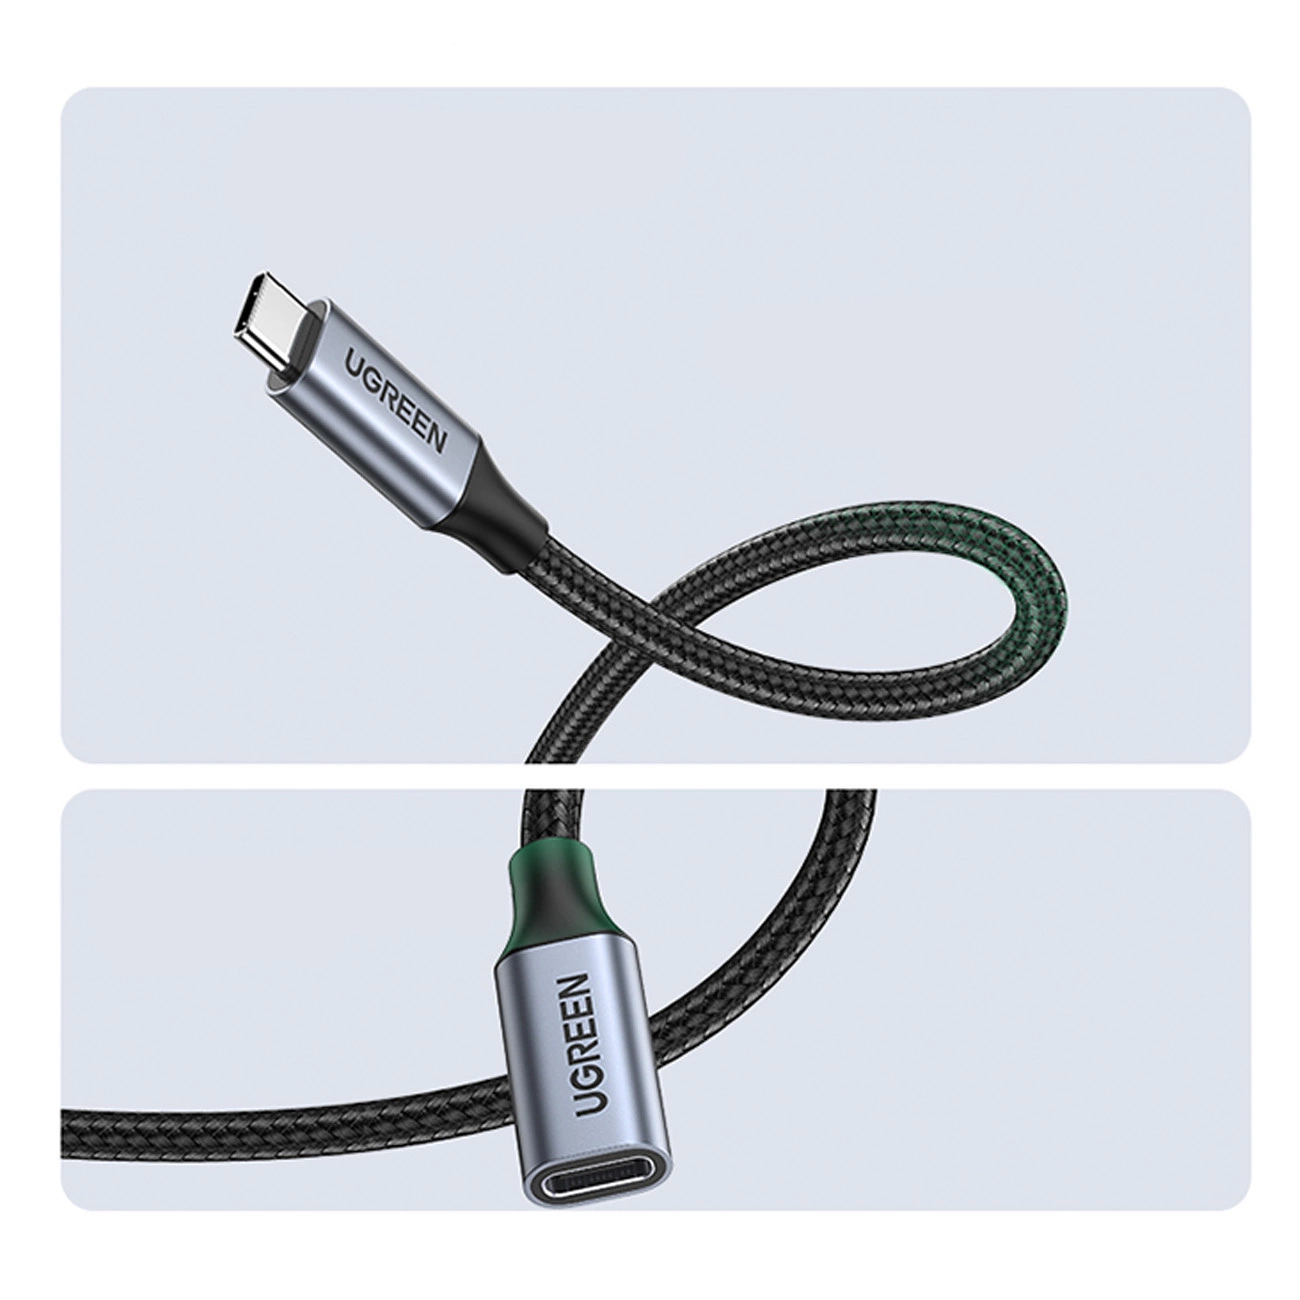 Graphic showing the reinforced braid on the Ugreen US372 30205 cable